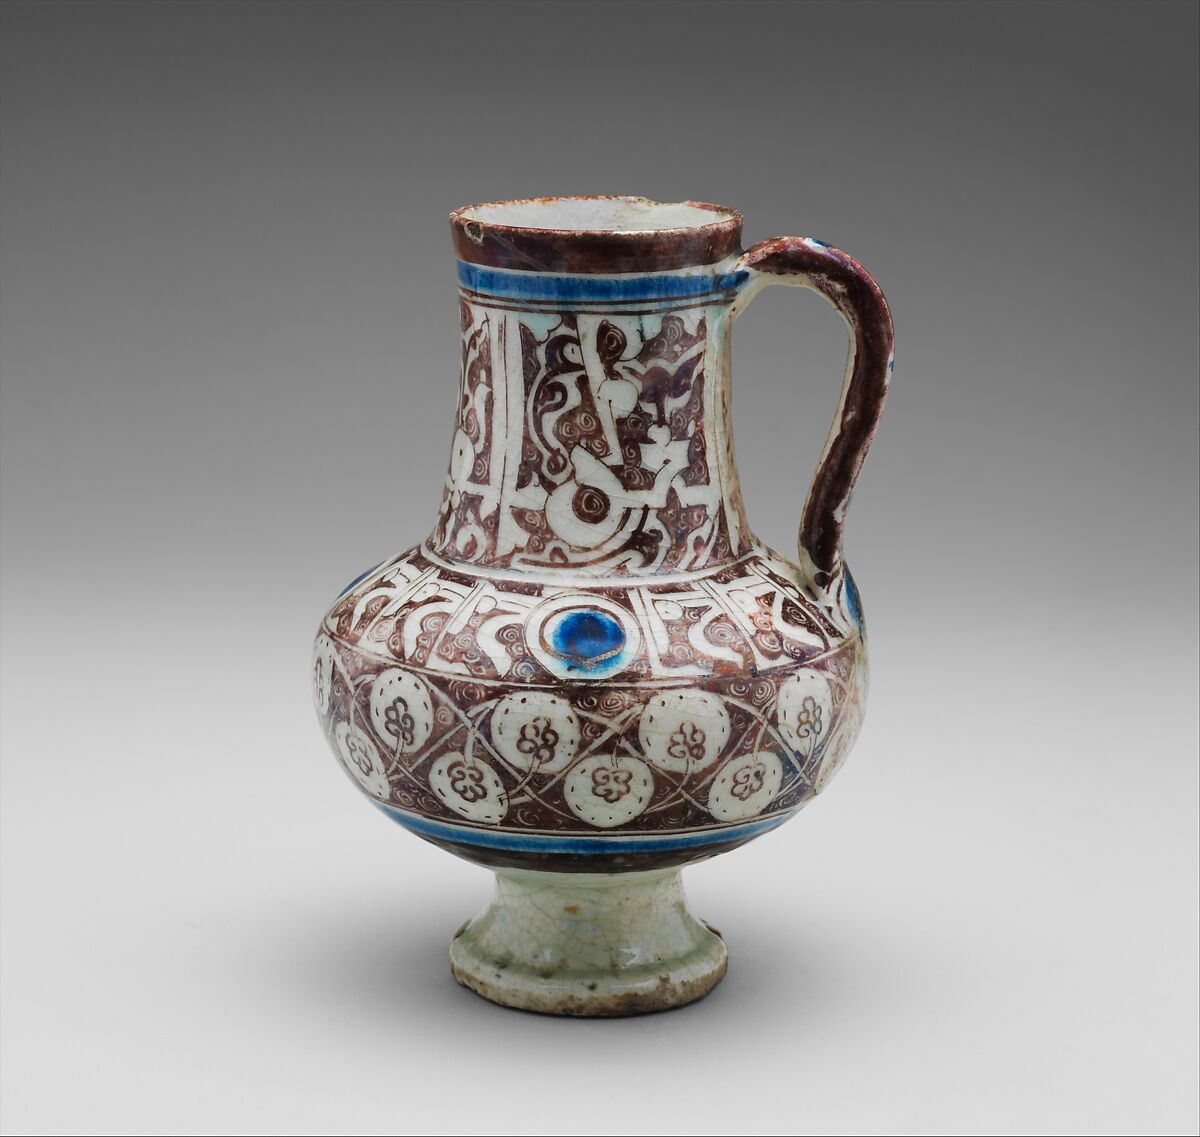 Ewer Inscribed with "al-'izz" ("Glory") in Floriated Kufic on its Neck, Stonepaste; painted in luster and blue on opaque white glaze under transparent glaze 